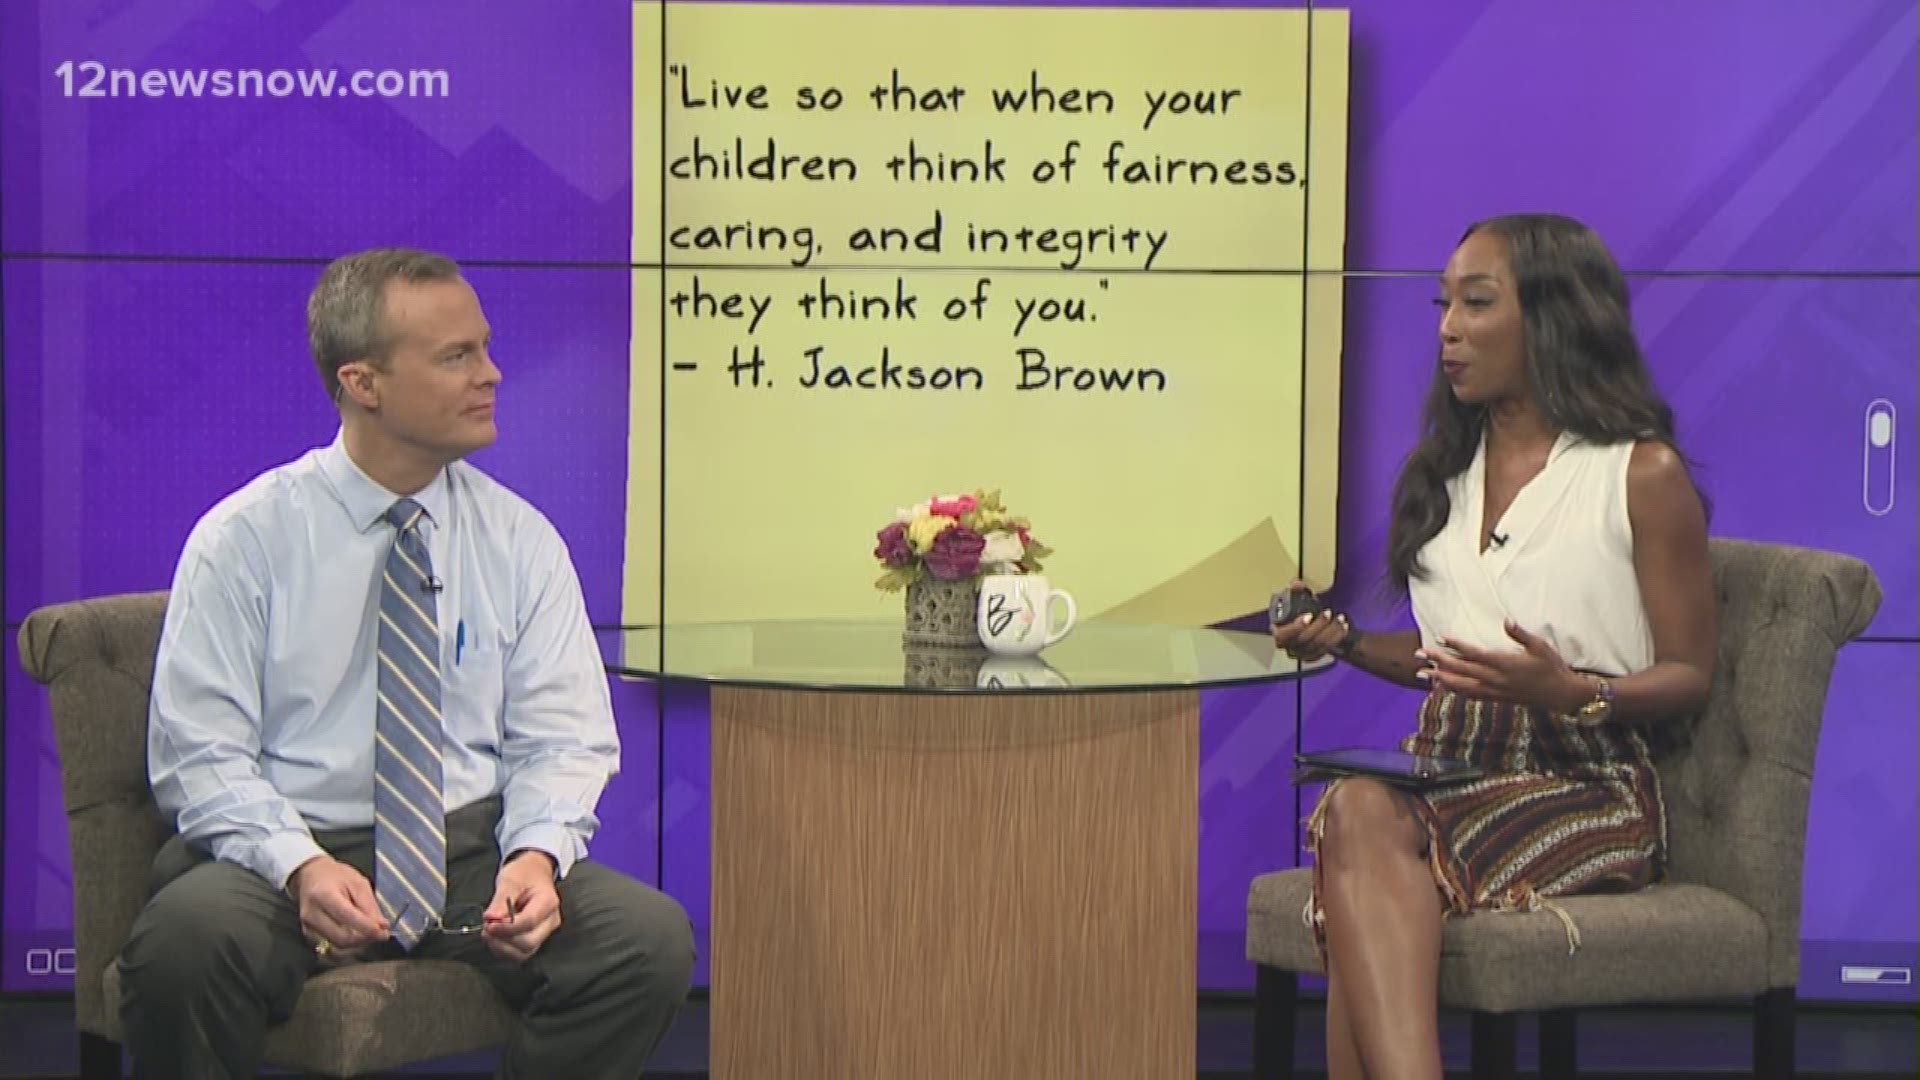 "Live so that when your children think of fairness, caring, and integrity they think of you." H. Jackson Brown